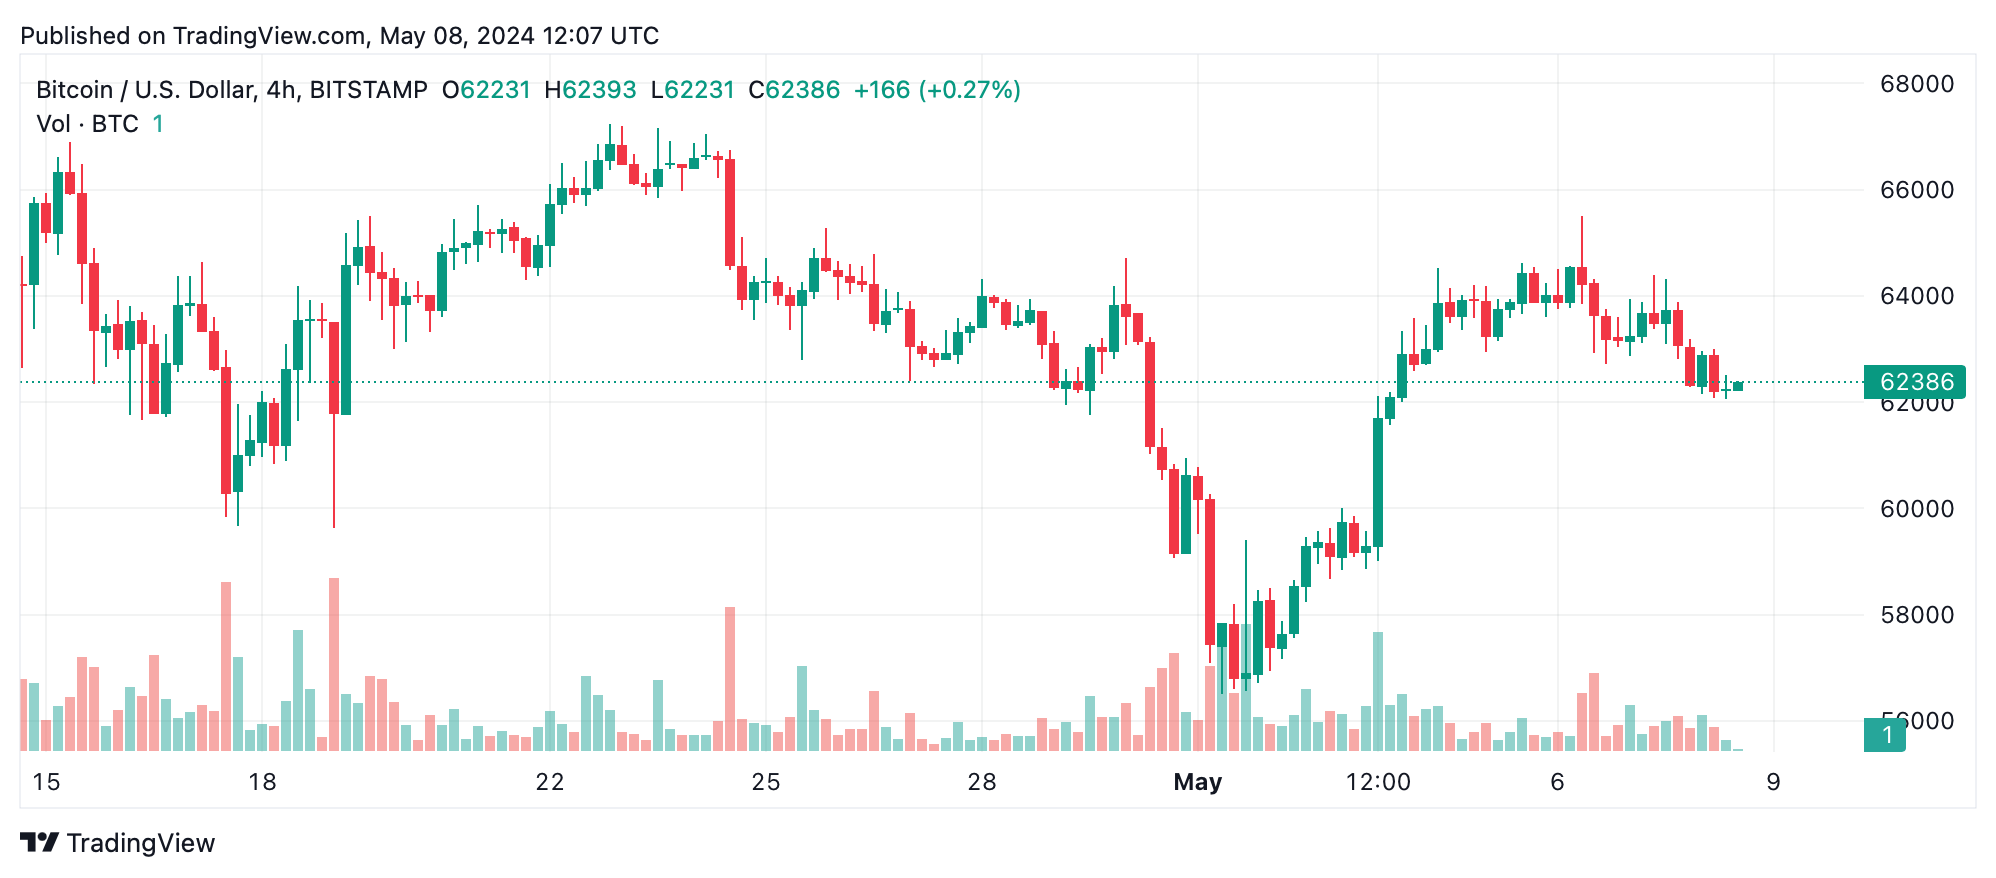 Bitcoin Technical Analysis: BTC Faces Growing Uncertainty Amidst Market Fluctuations